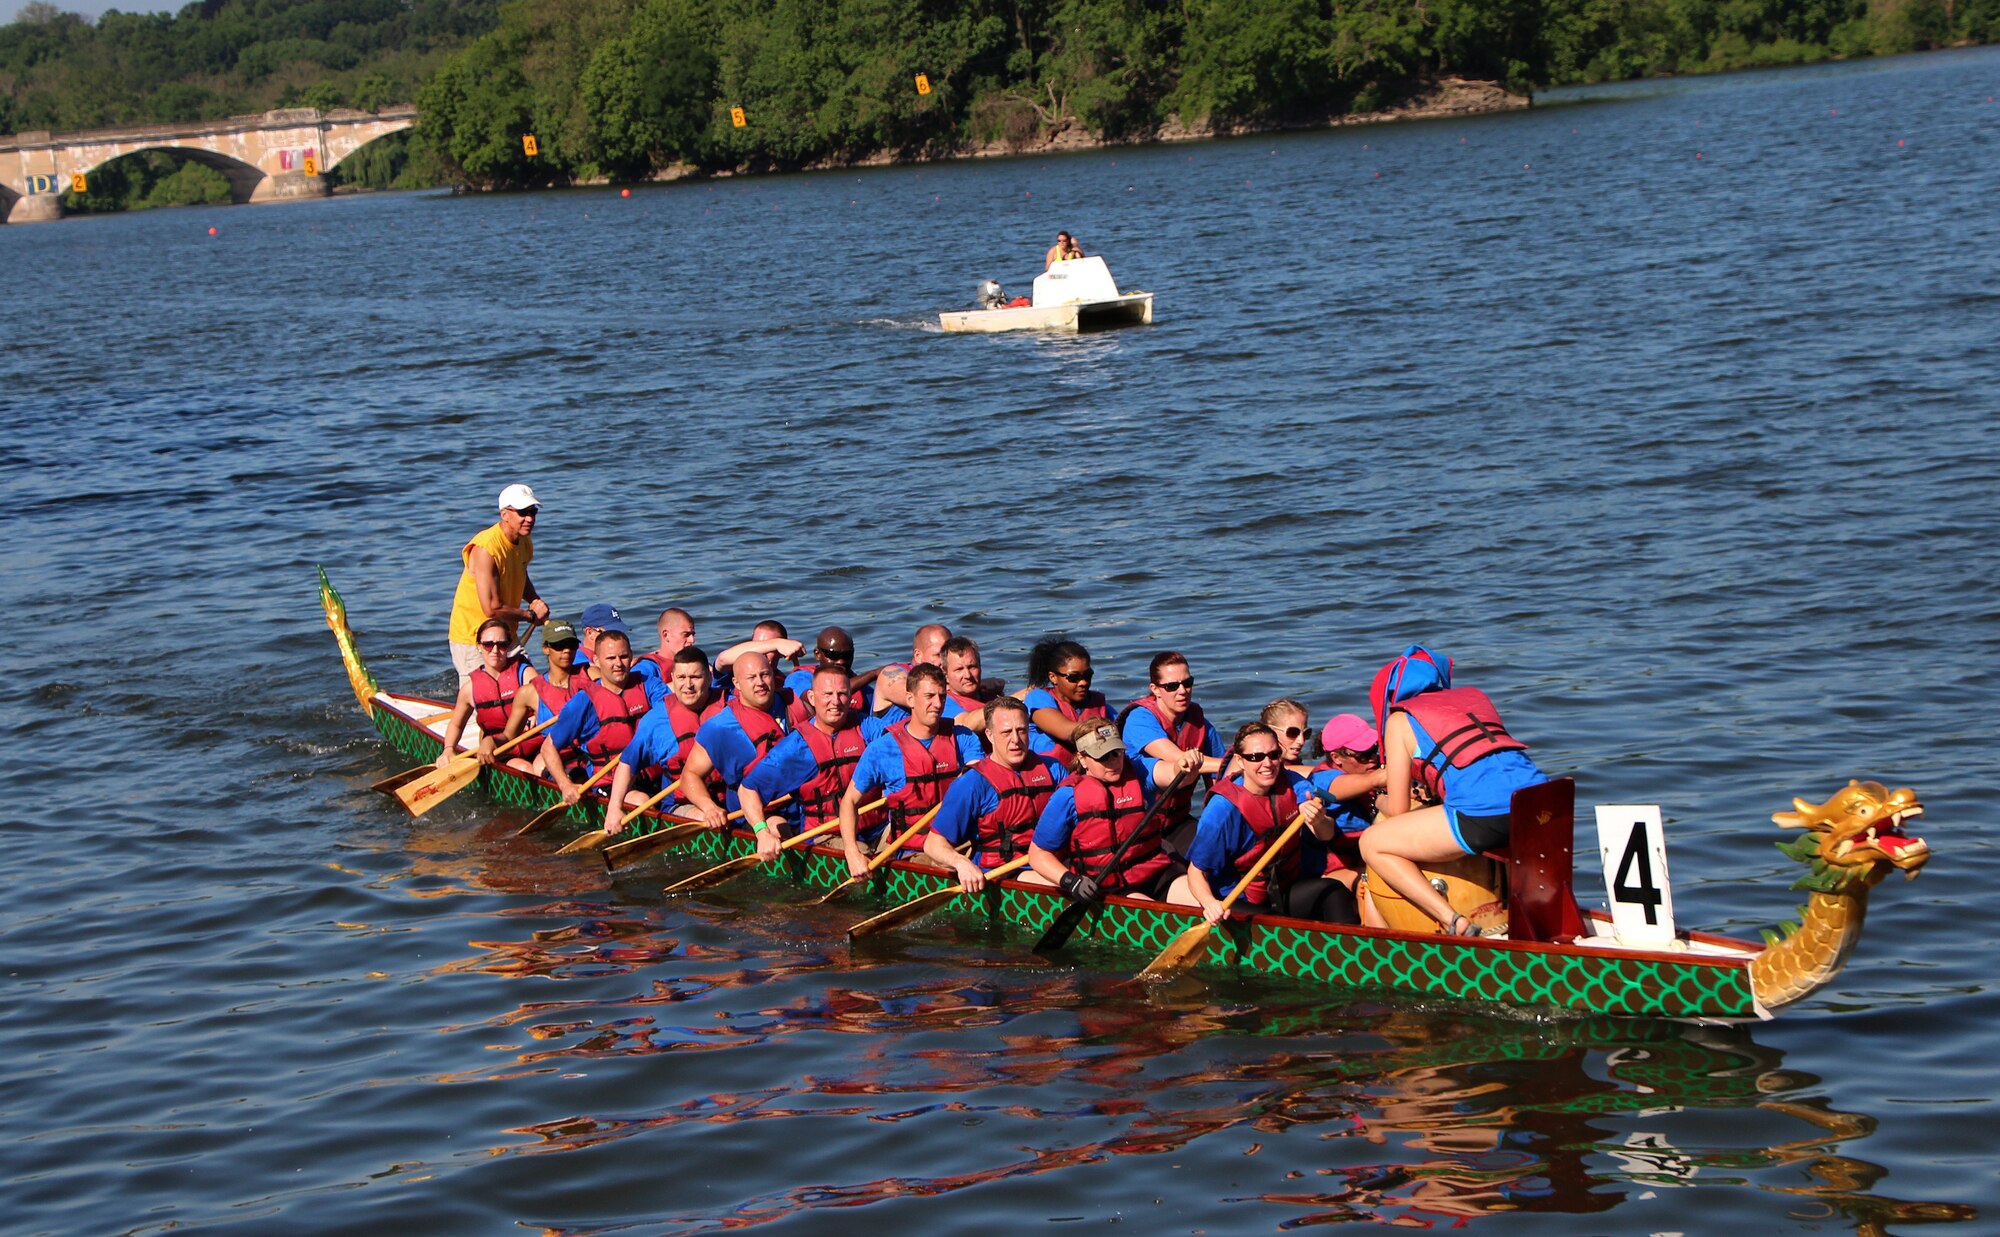 Volunteers from the 111th Fighter Wing participate in the 7th Annual Independence Dragon Boat Regatta held alone the Schuylkill River at Boathouse Row in Philadelphia on June 1, 2013. The team, known as the Air Guard Argonauts, consists of 20 oarsmen, a tiller operator and a drummer to mark timing. At the close of the event, the Argonauts fared well in the finals with a race-time approaching professional standings. Team members practice weekly in the evenings as race day nears. This is the second year that wing members have competed. Their next schedule competition is slated for Oct. 5 at the same location in the Philadelphia International Dragon Boat Festival. If you would like to participate, contact team captain at: 215-323-7172.  